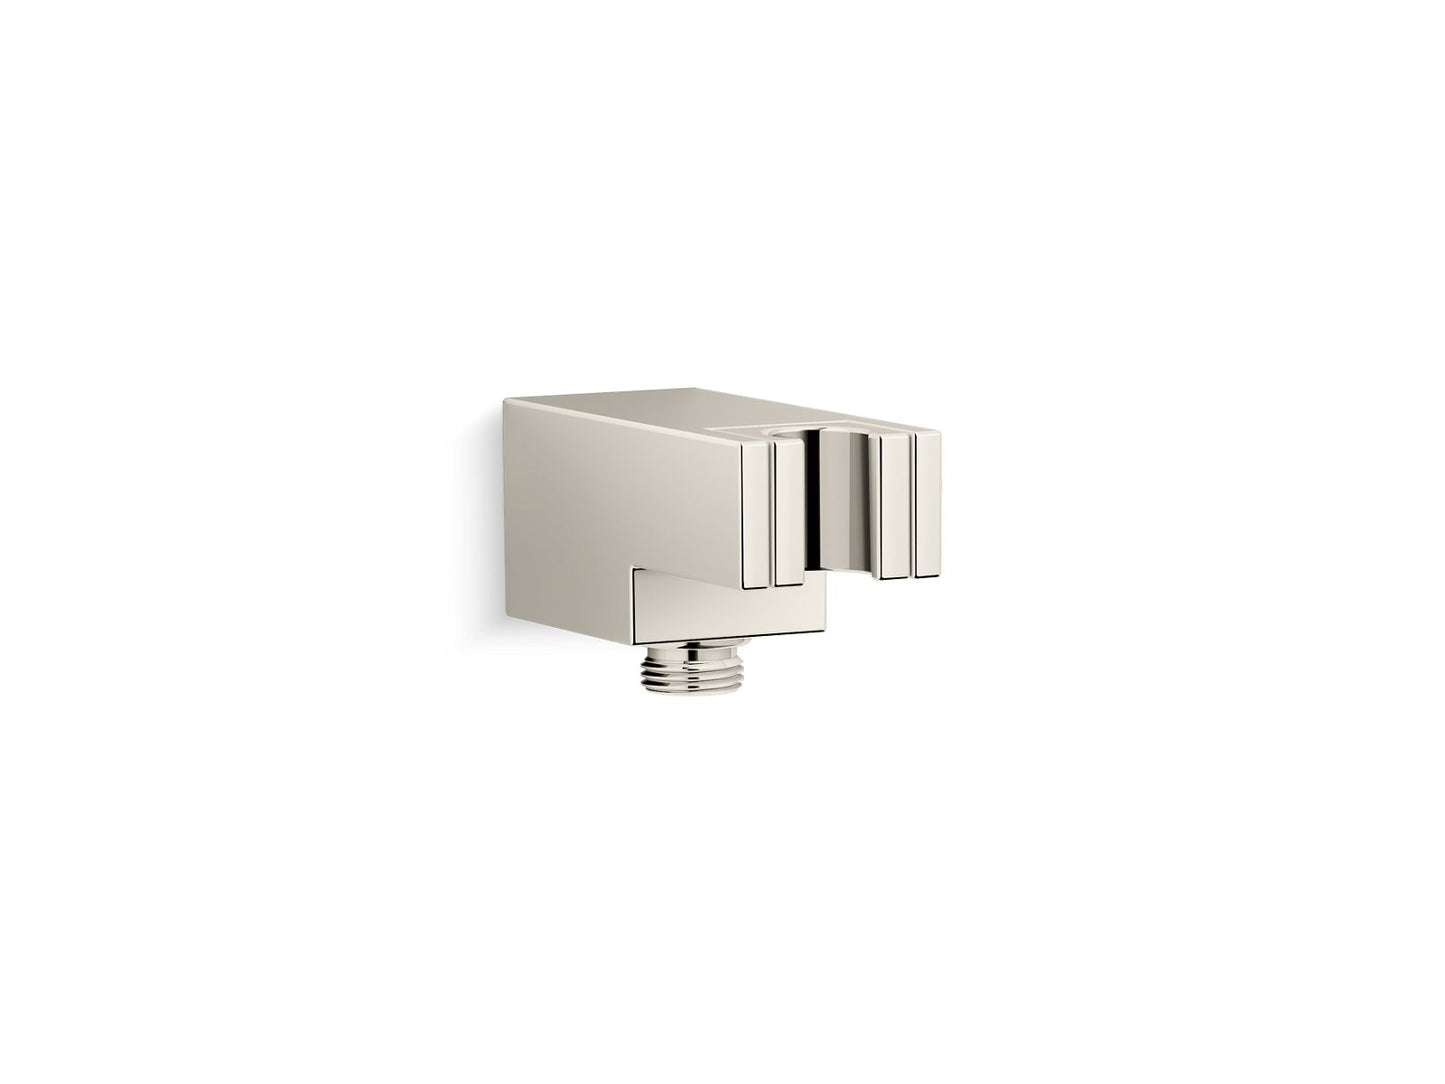 KOHLER K-26310-SN Statement Wall-Mount Handshower Holder With Supply Elbow And Check Valve In Vibrant Polished Nickel